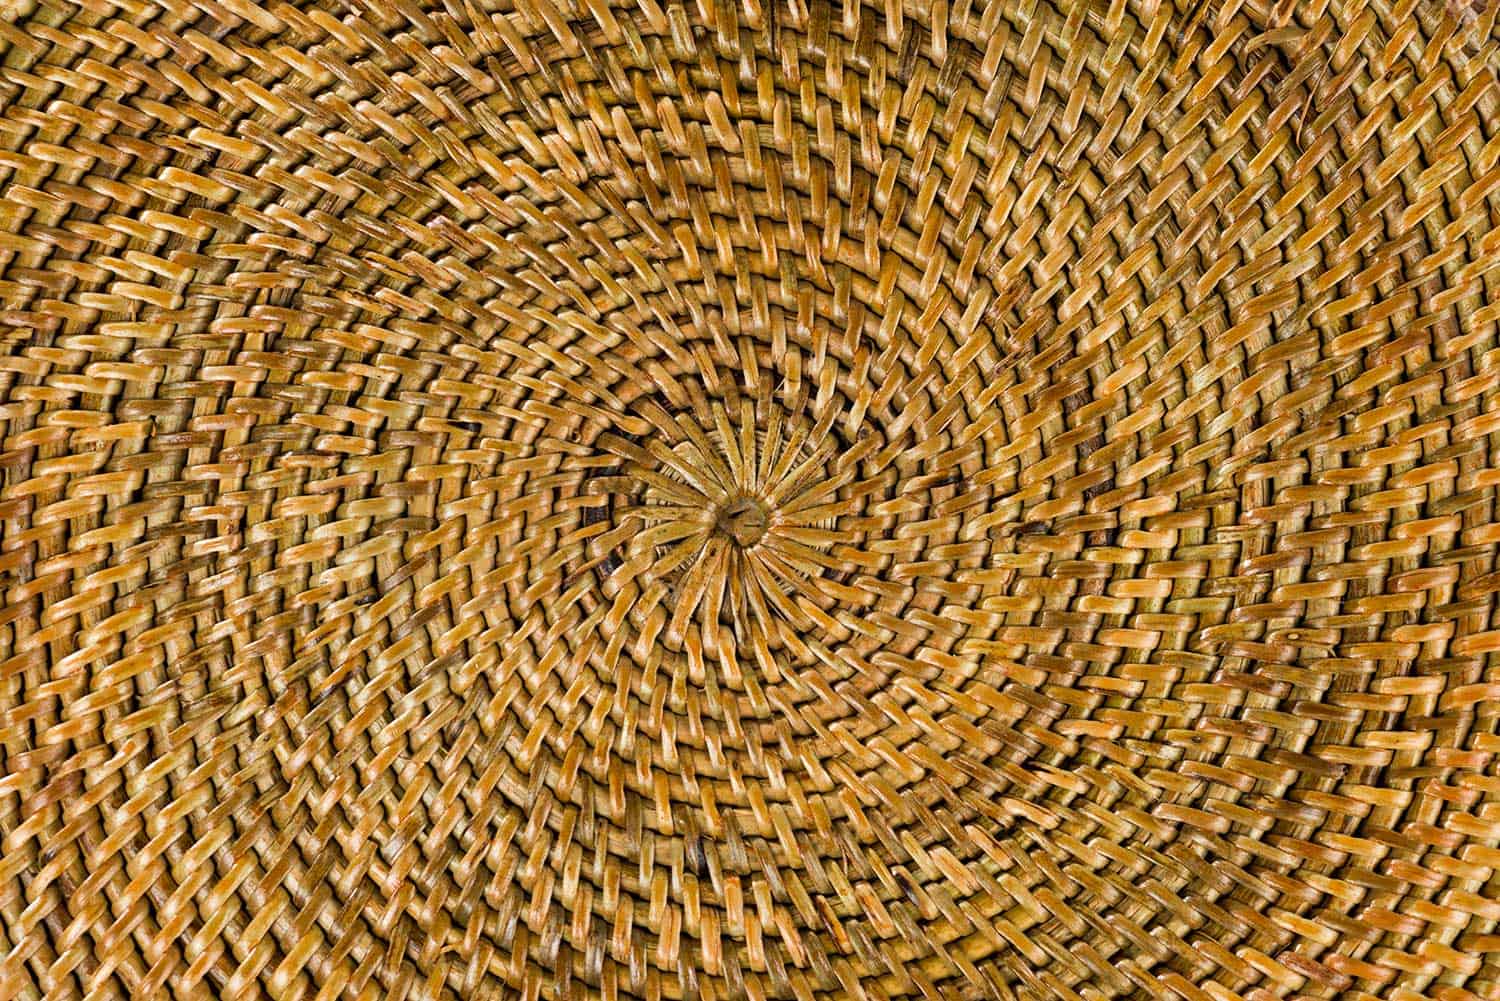 Concentric texture of a natural woven surface